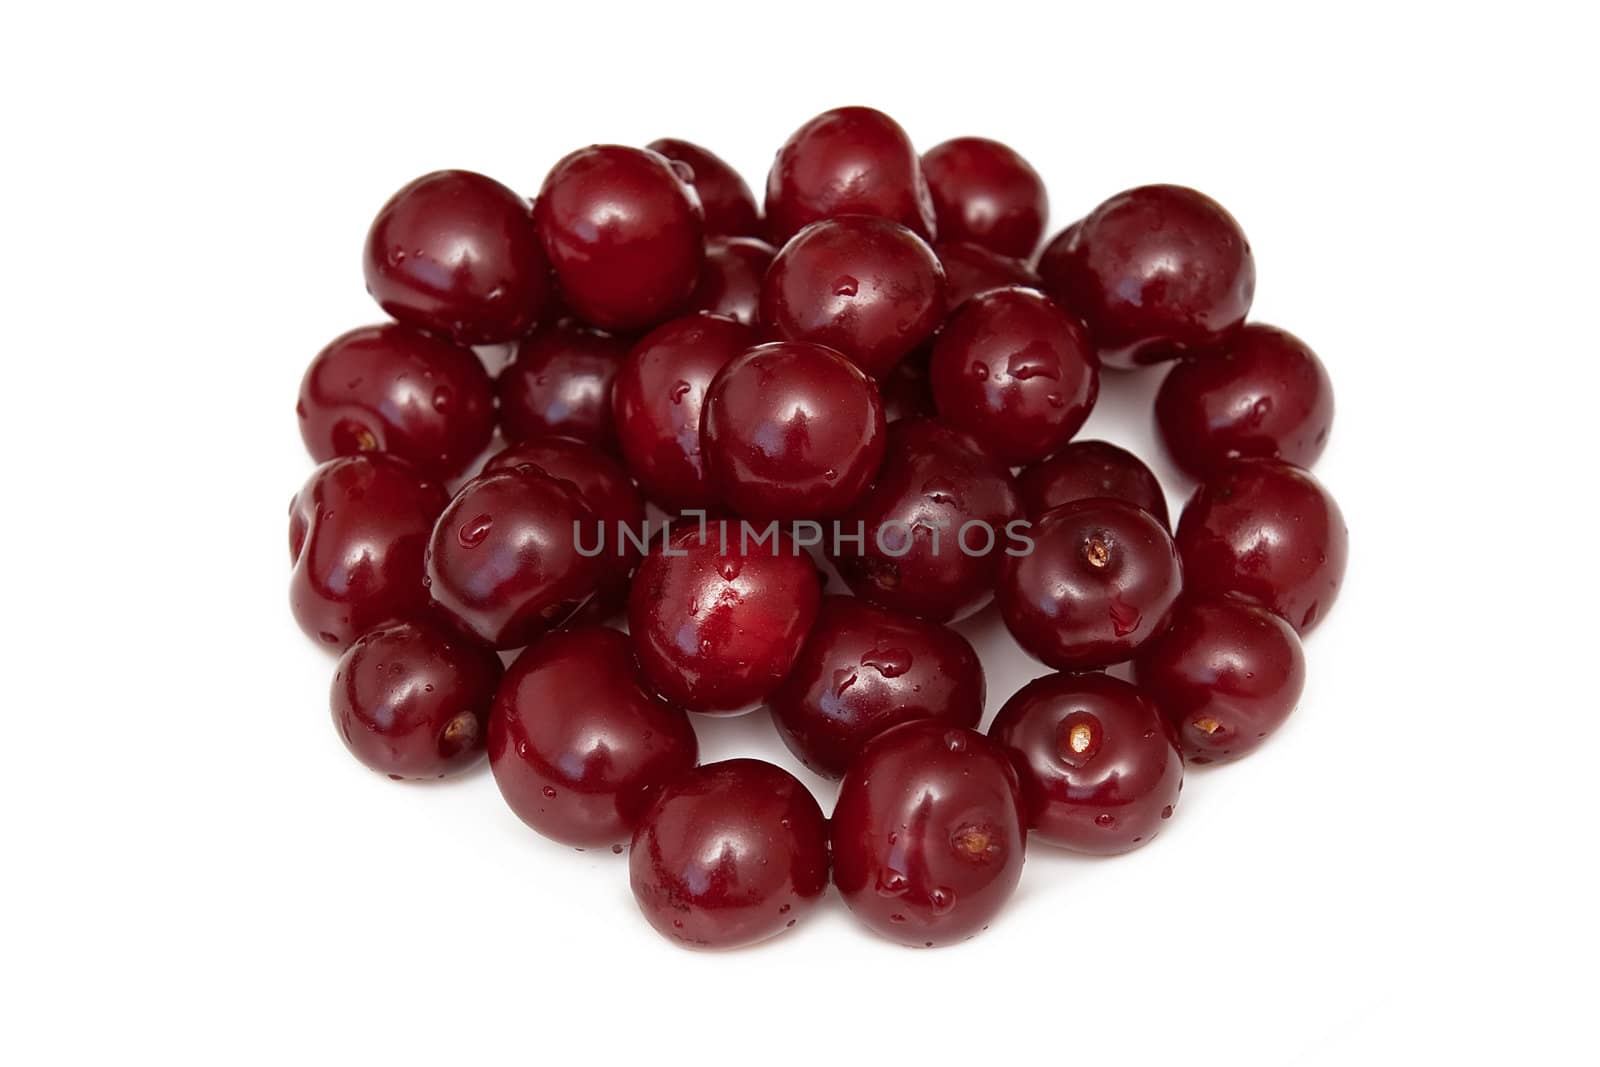 Cherries on the white background